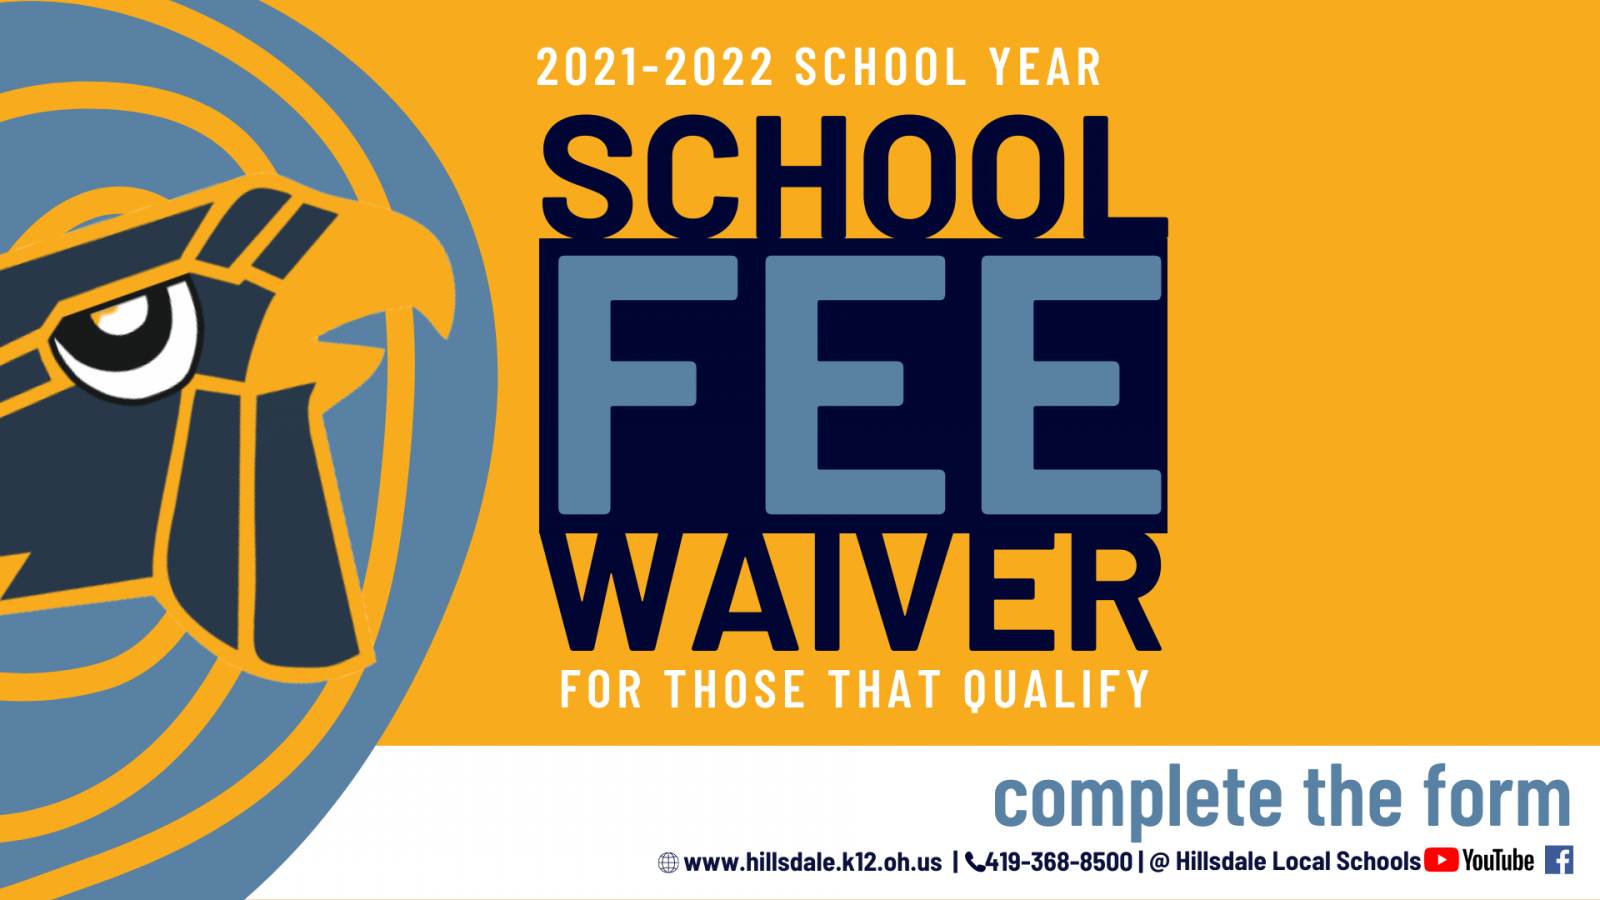 A graphic with the text: "2021-2022 School Year School Fee Waiver for Those that Qualify; Complete the Form."